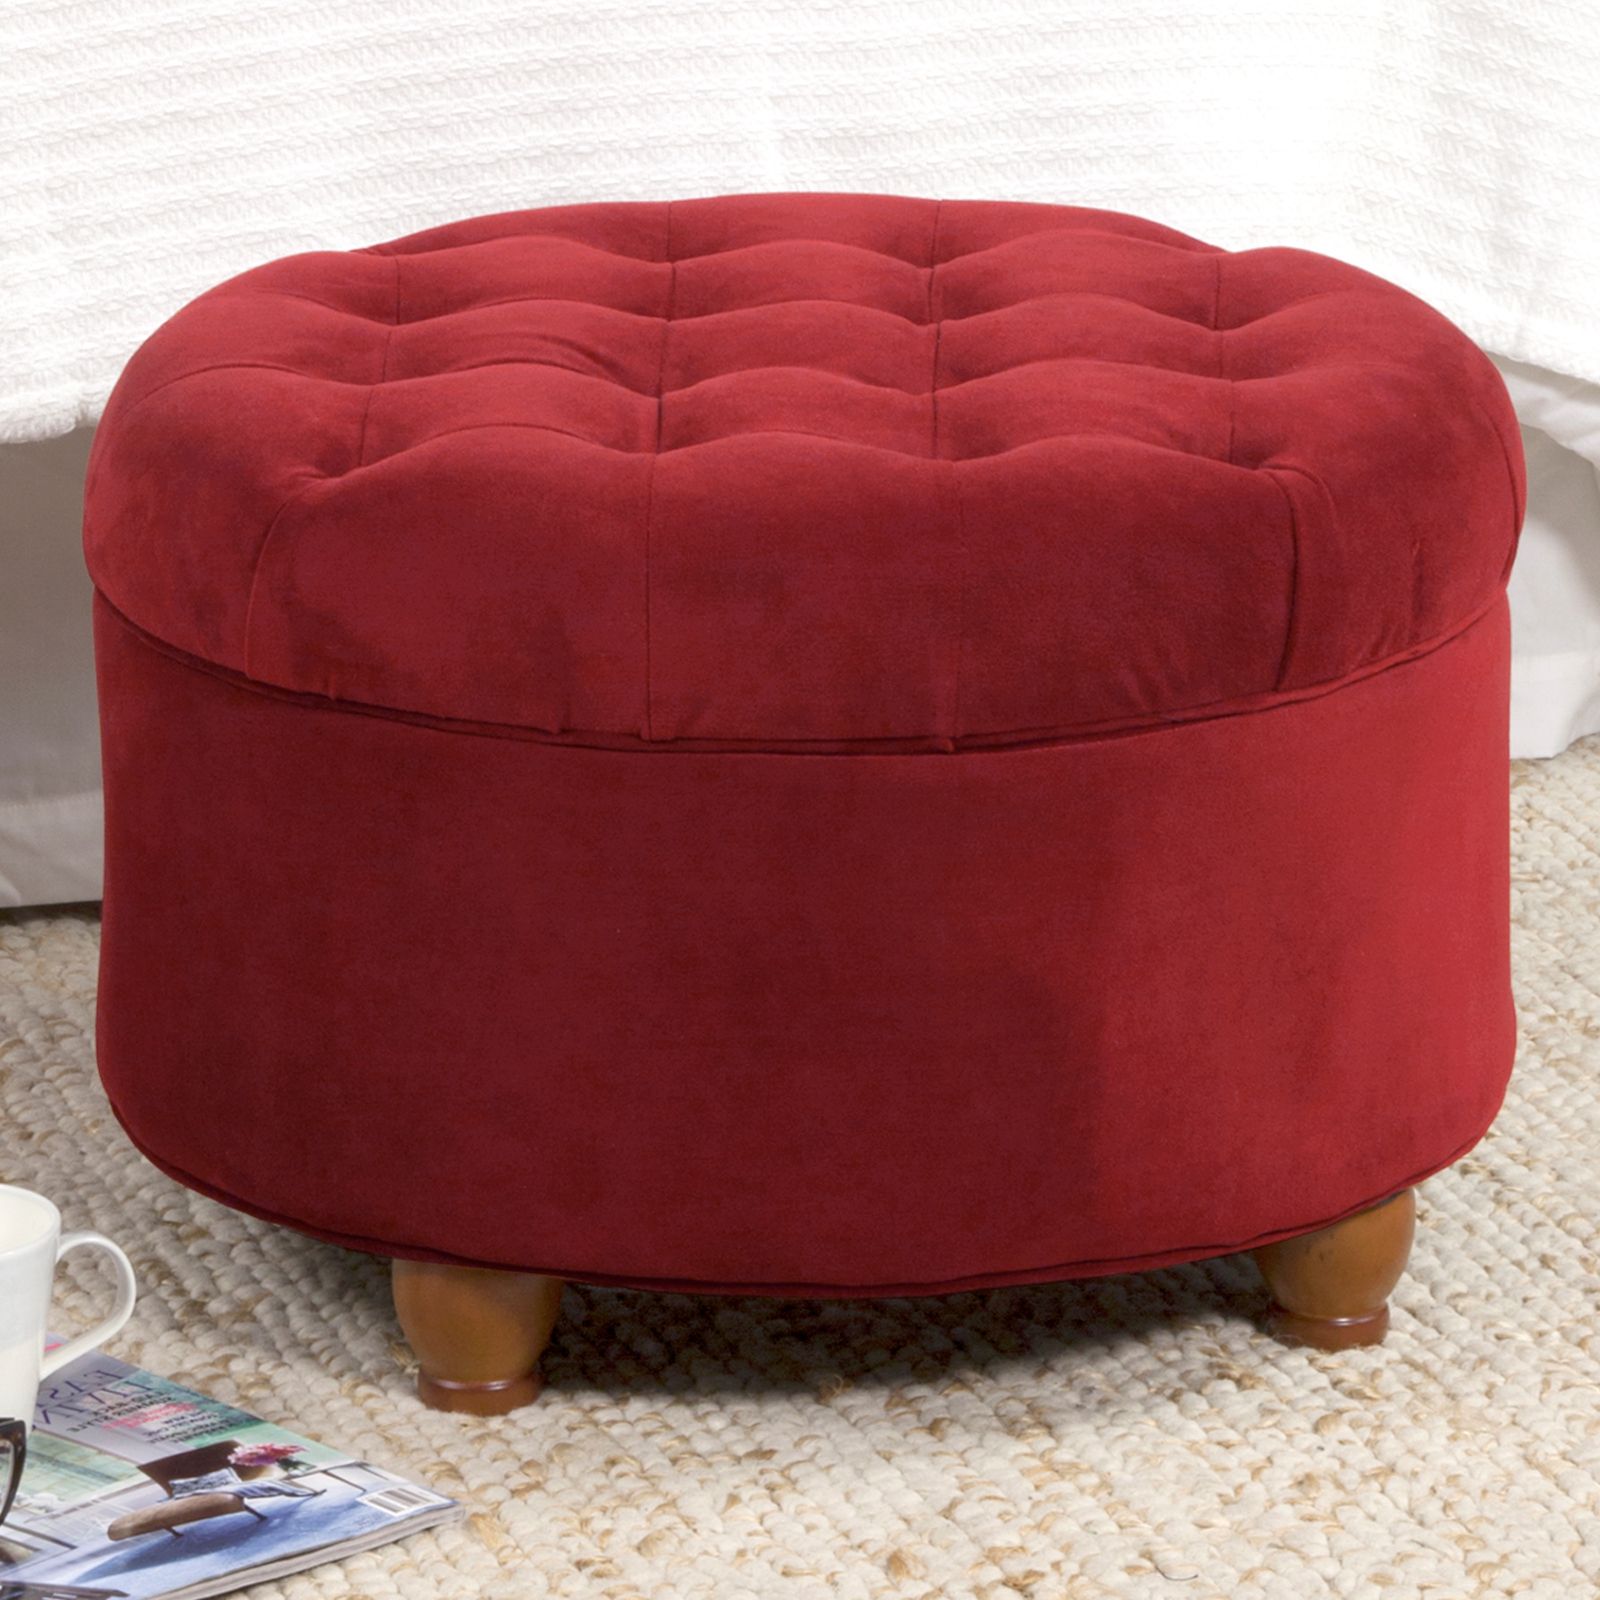 Best And Newest Velvet Tufted Storage Ottomans Within Kinfine Velvet Tufted Storage Ottoman – Ottomans At Hayneedle (View 2 of 10)